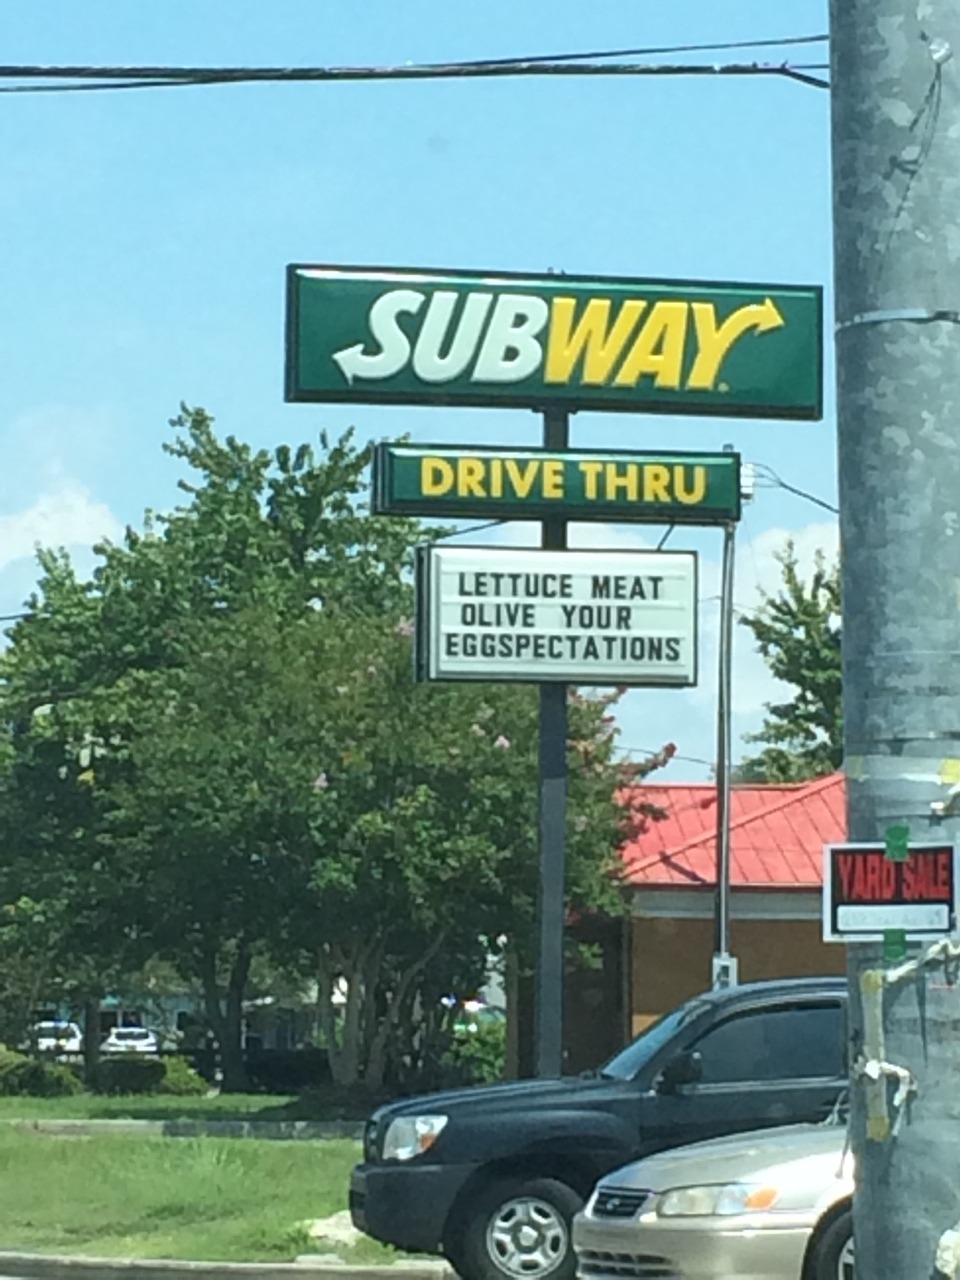 singingsh0wtunes:
“ subway sure doesn’t mess around when it comes to puns
”